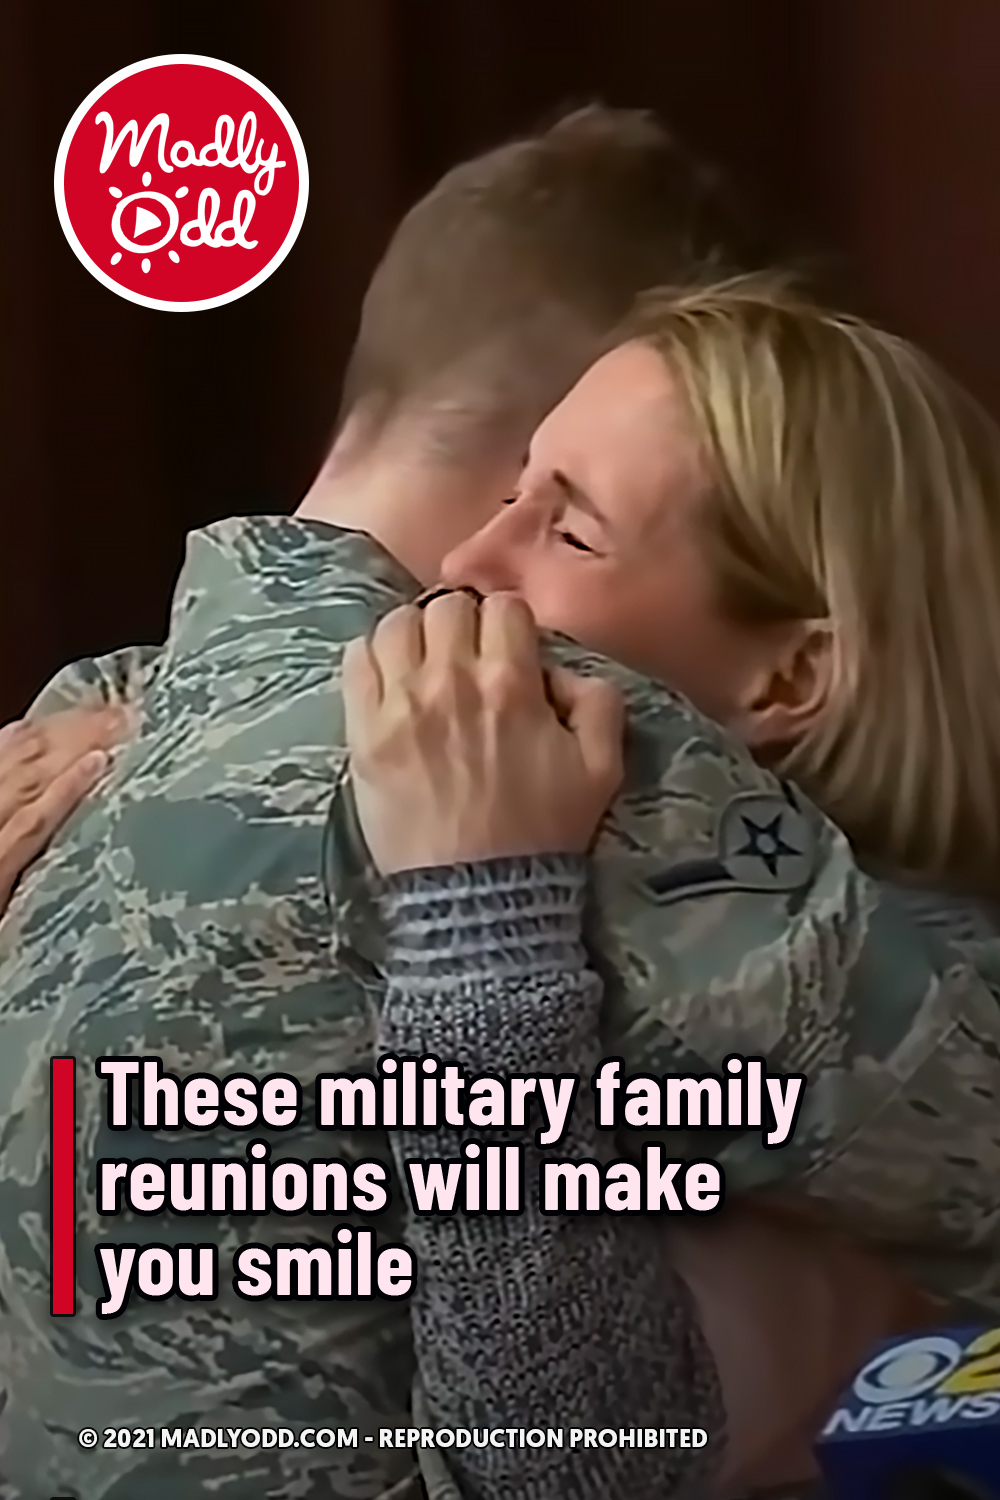 These military family reunions will make you smile